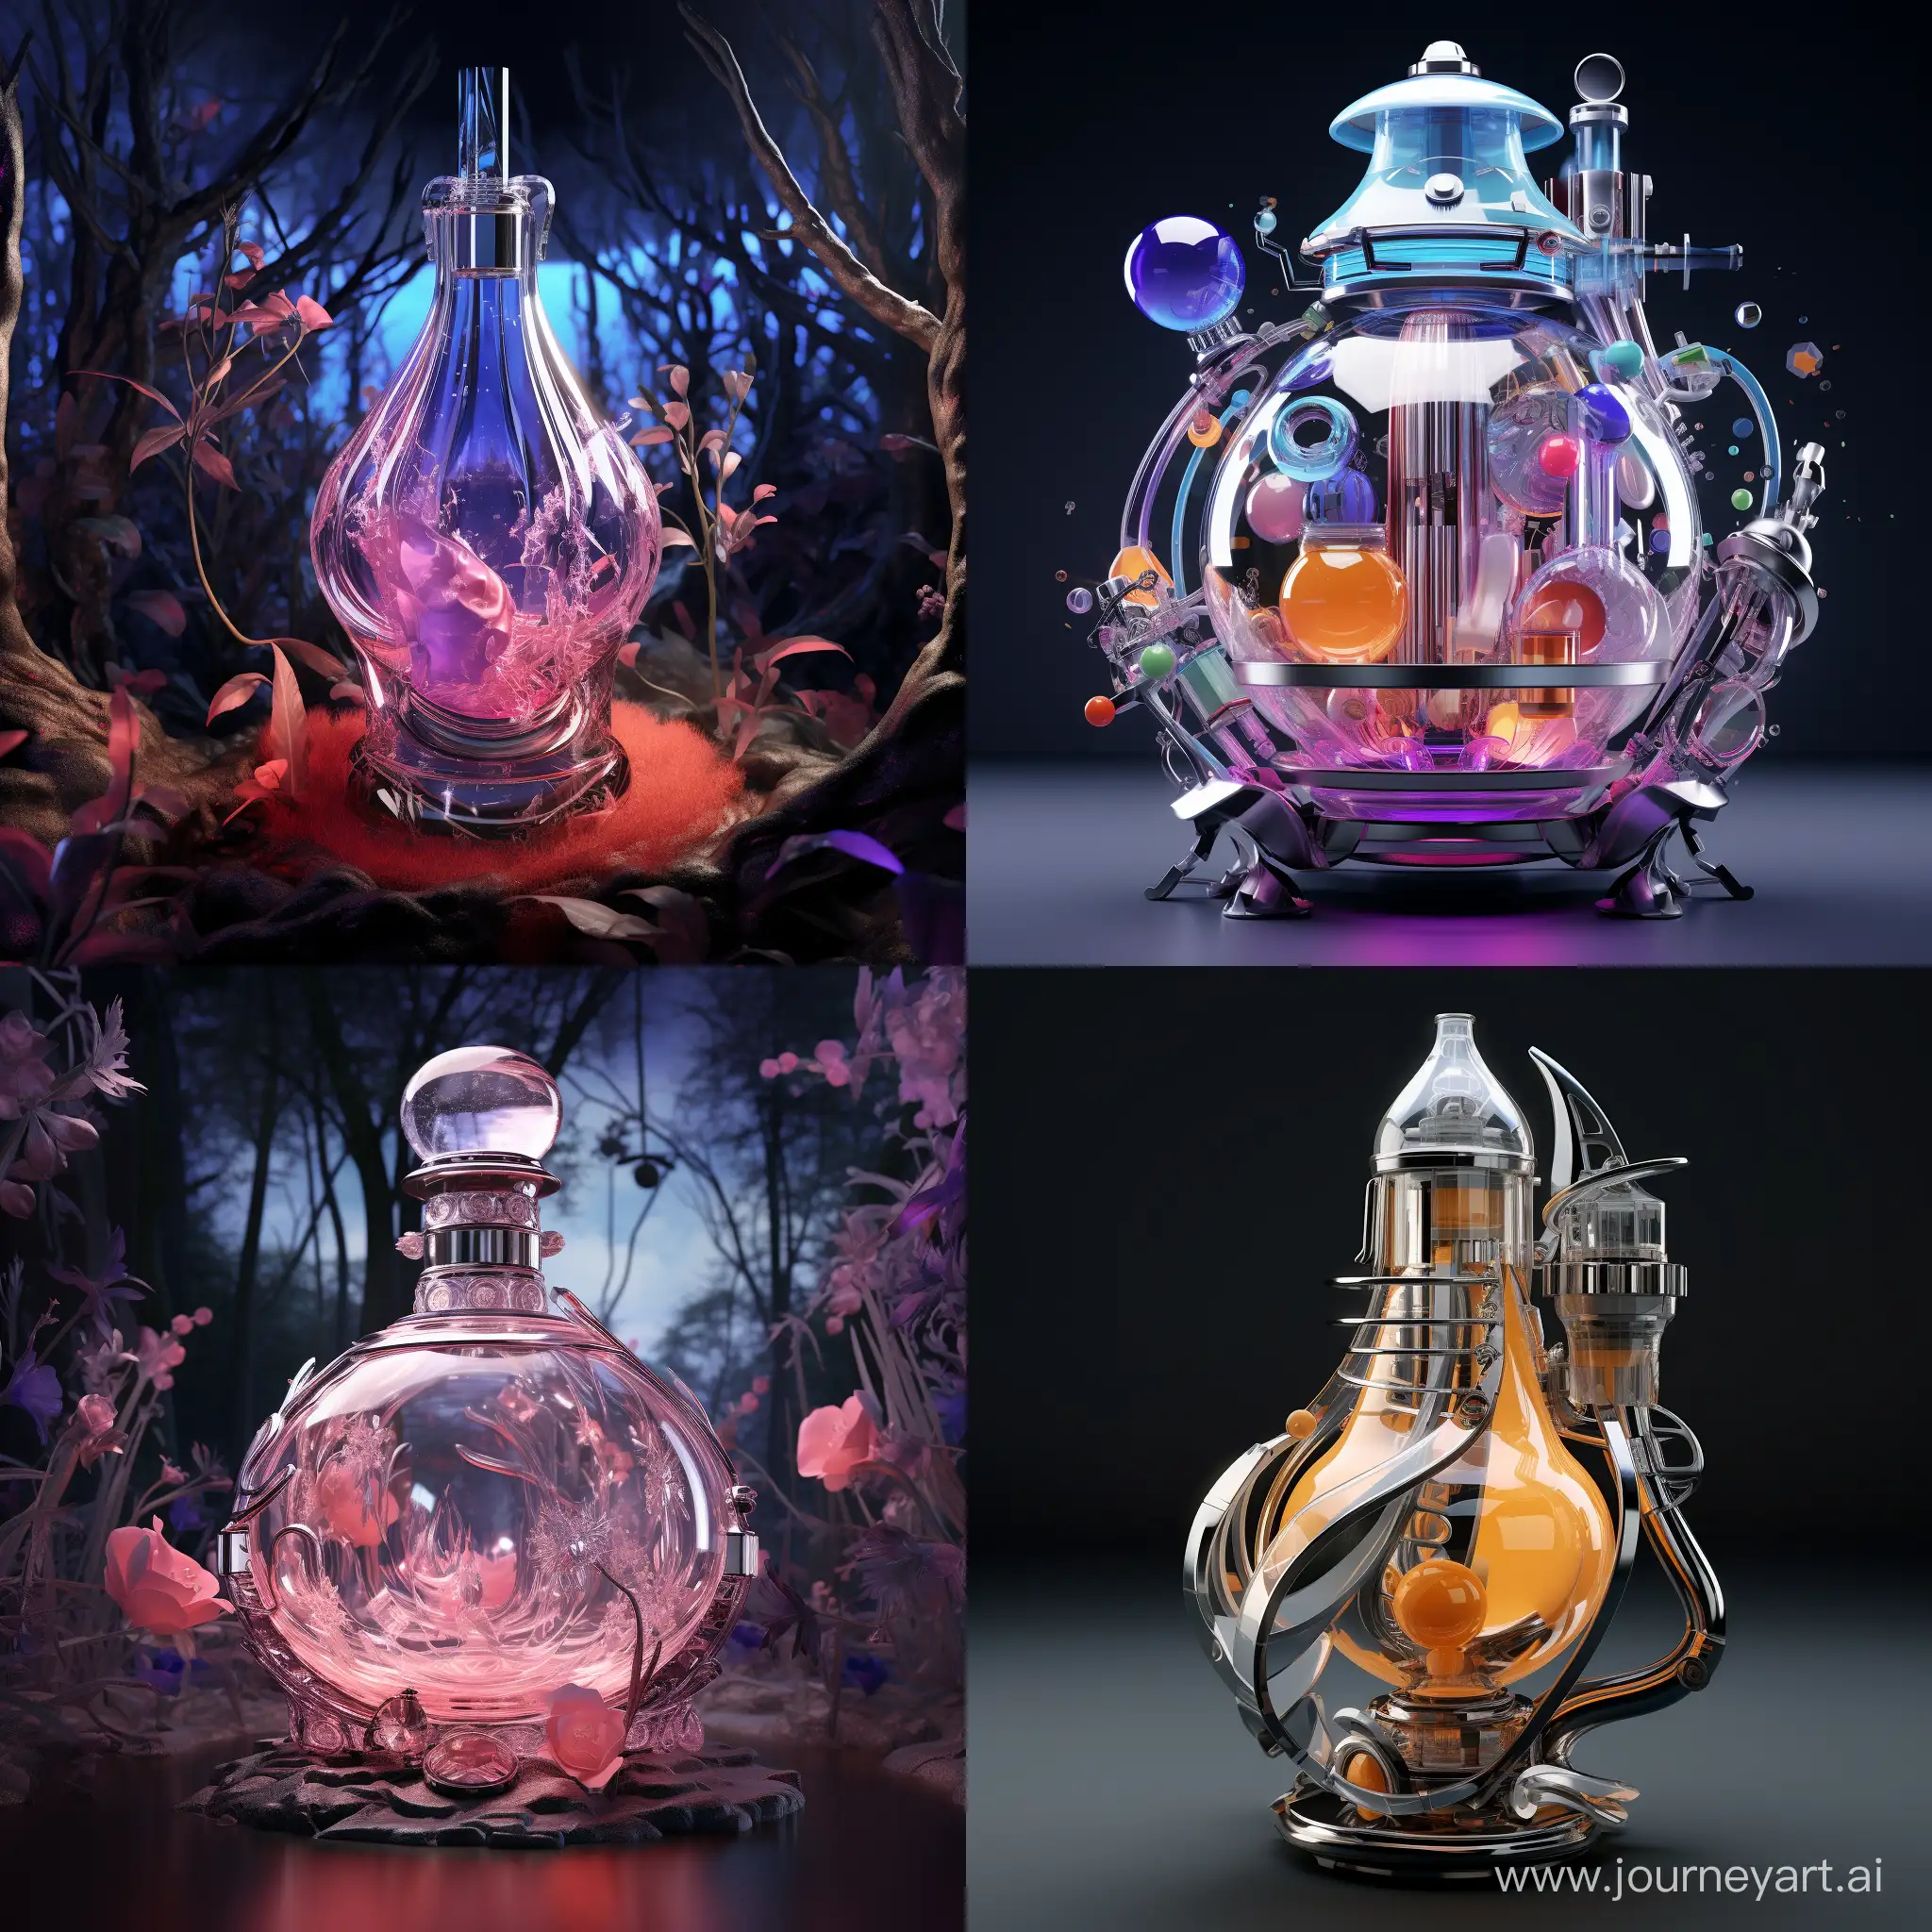 Imagine a party perfume bottle from the future 